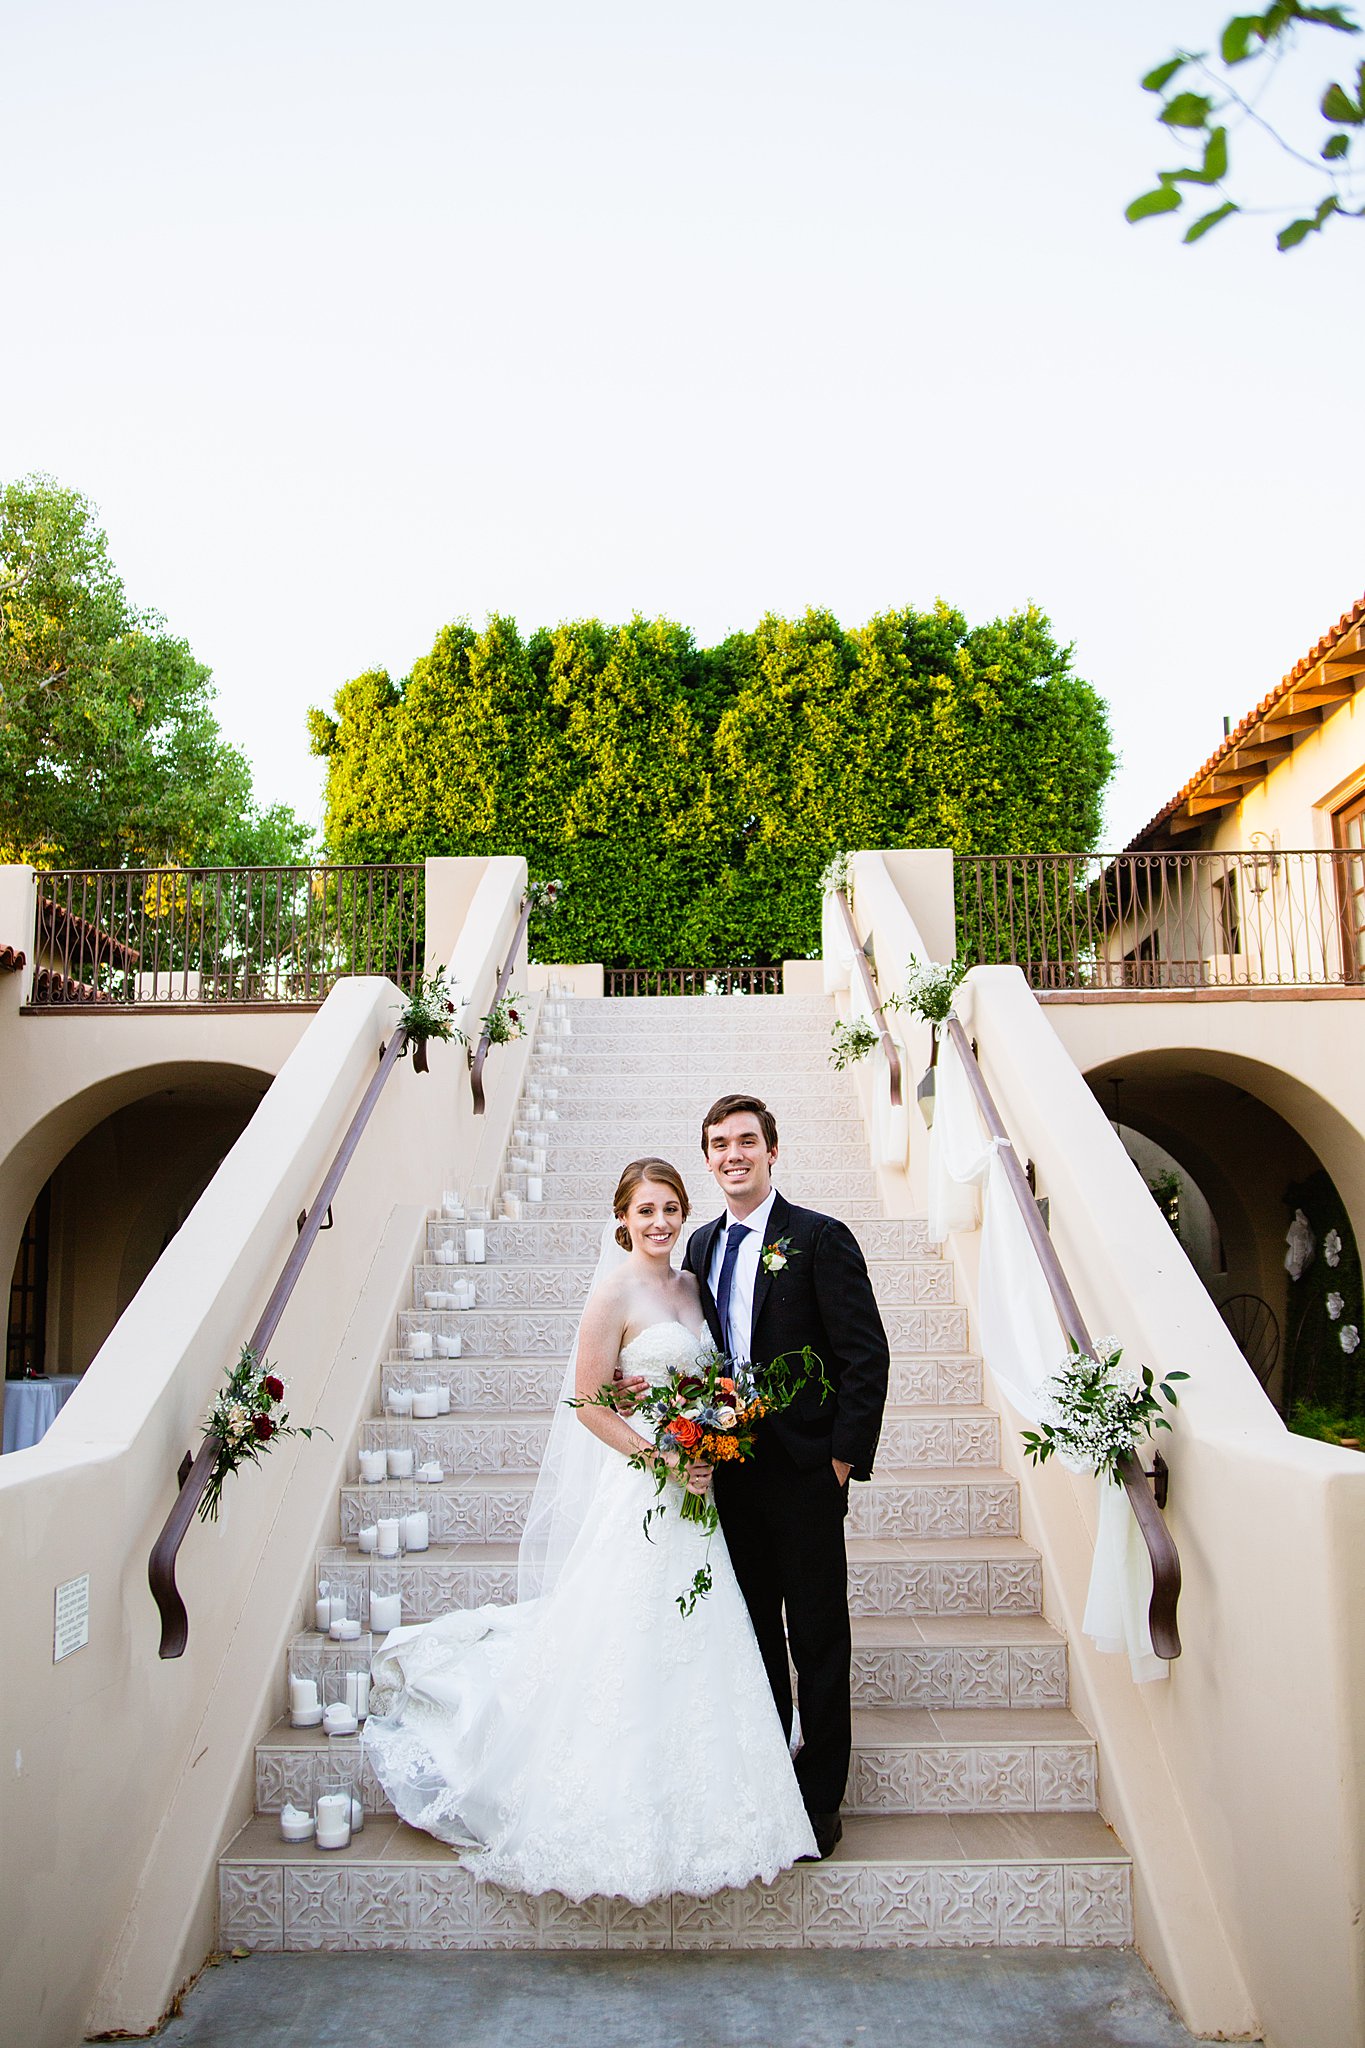 Bride and Groom pose during their Secret Garden Events wedding by Arizona wedding photographer PMA Photography.